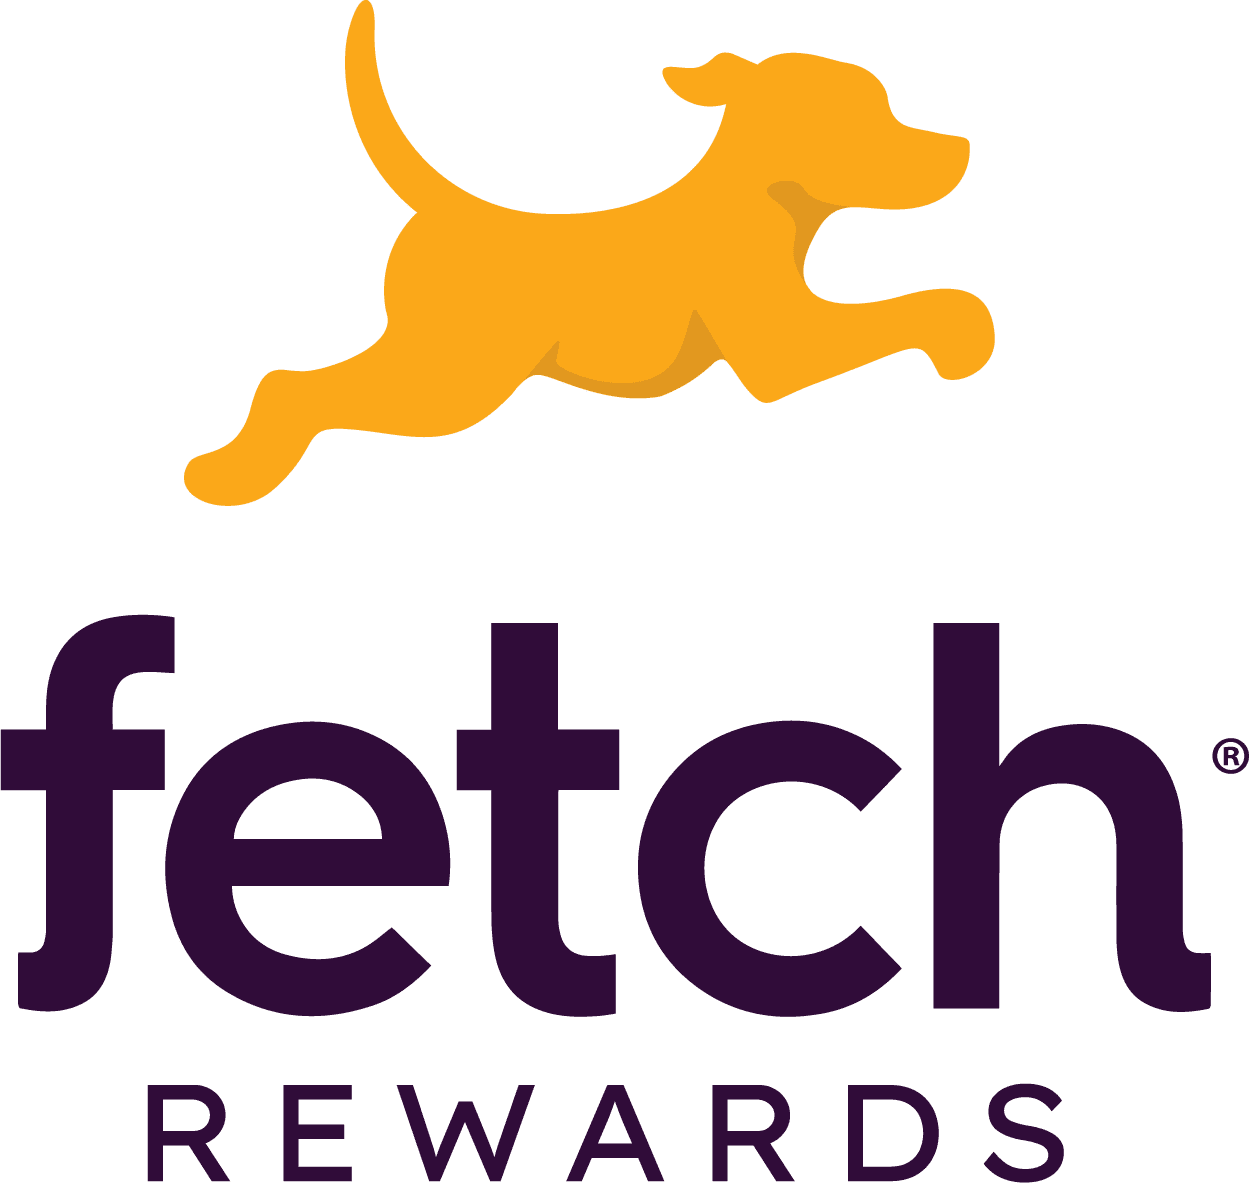 Fetch Rewards Statistics and Facts 2022